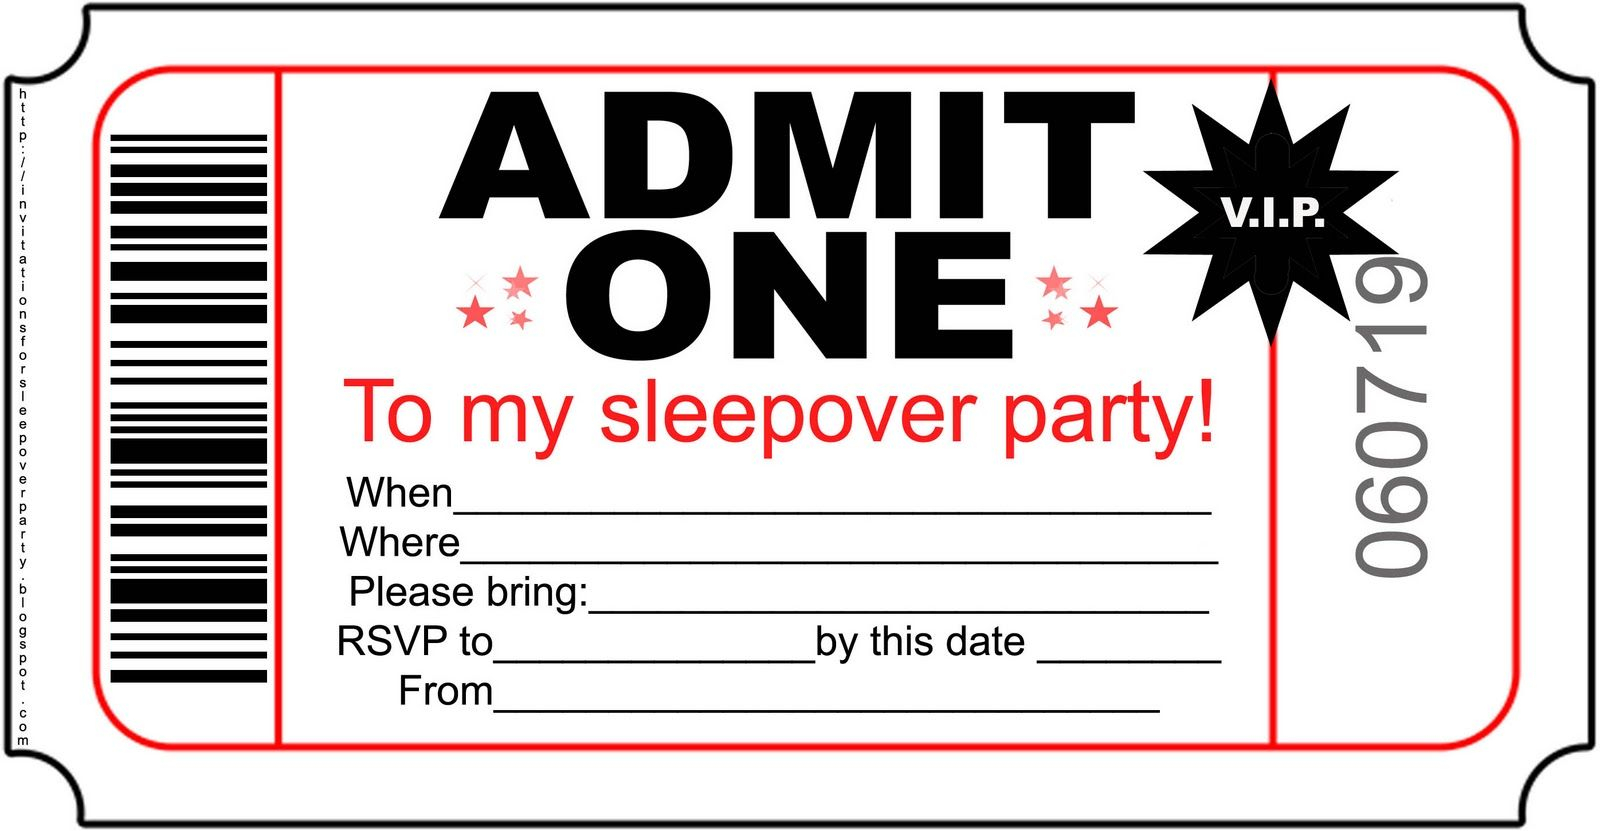 Free Printable Sleepover Invitation Templates Idees In 2018 intended for dimensions 1600 X 831